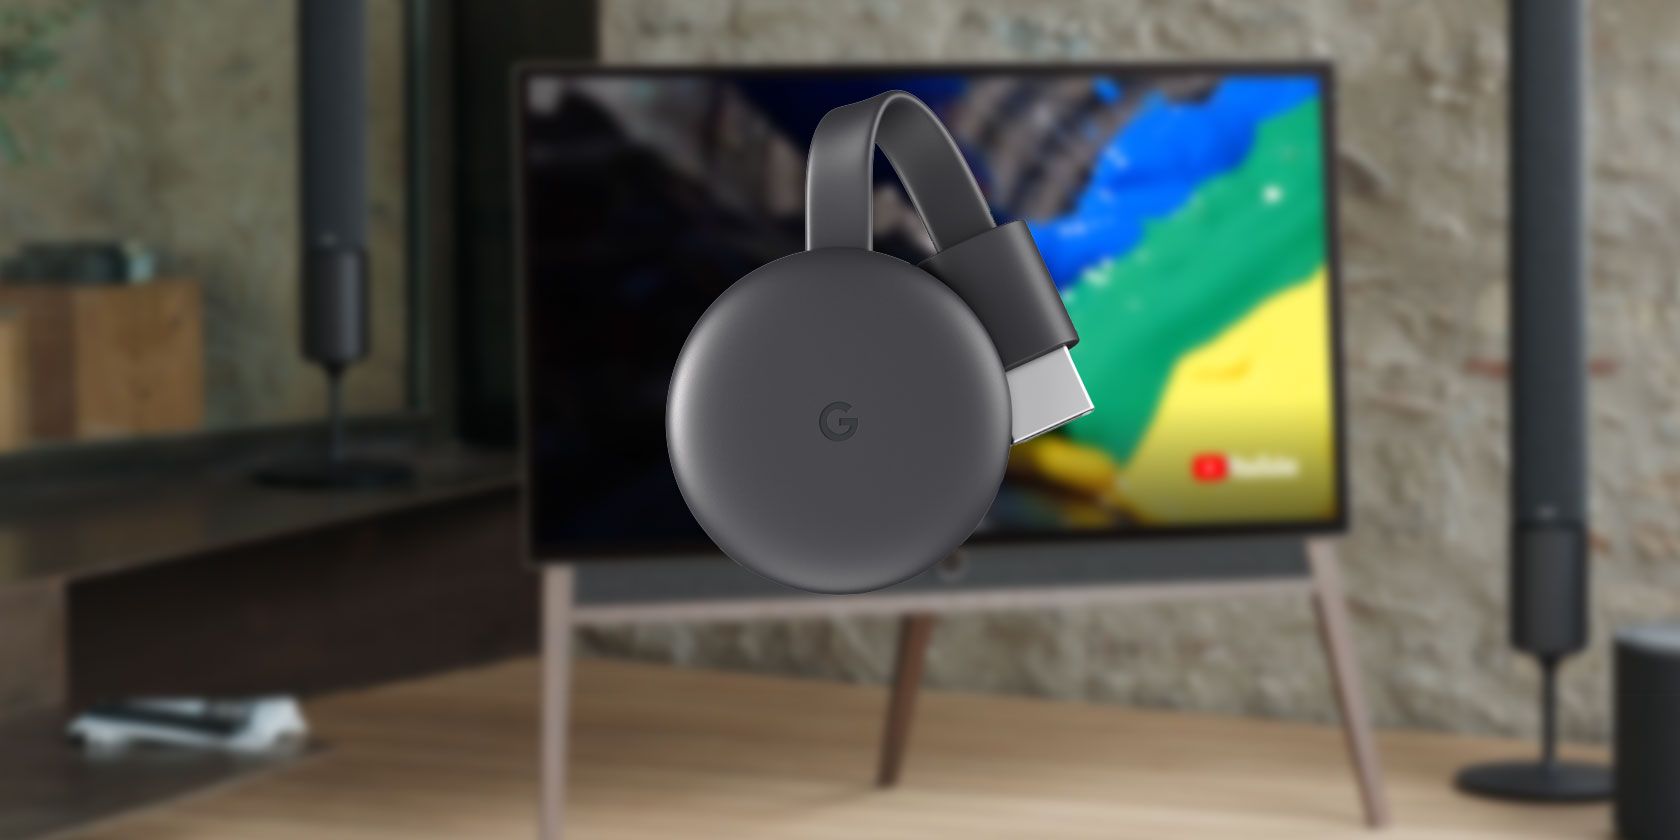 download chrome cast for mac